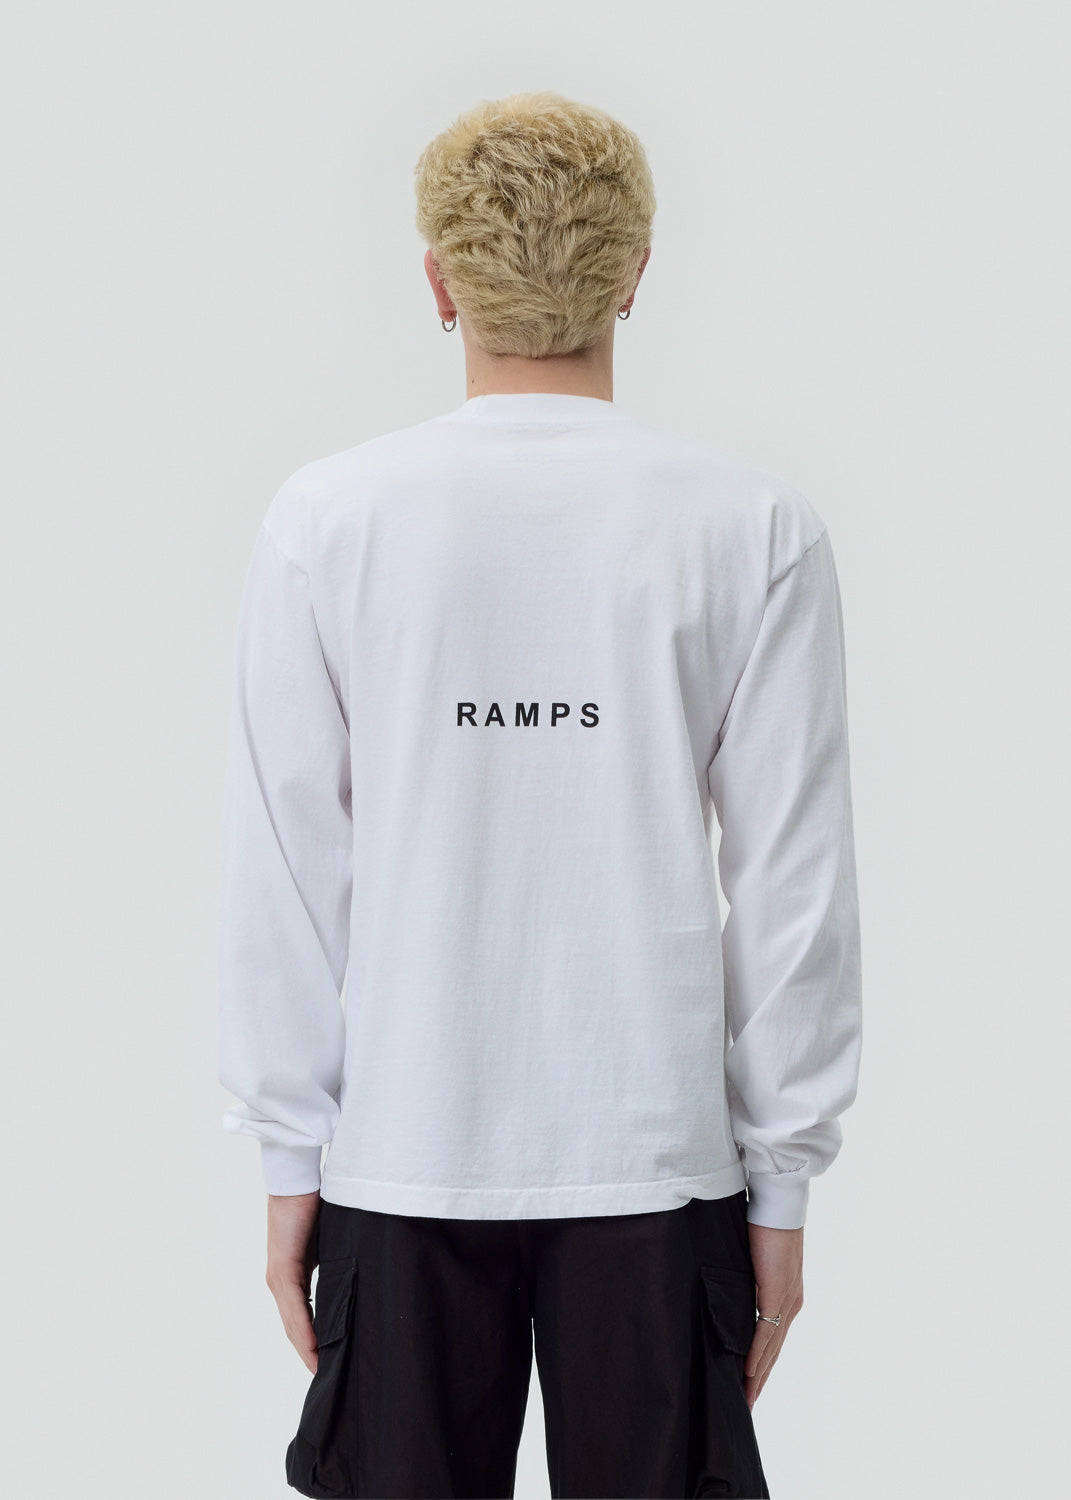   Edit Ramps - White Stack Long Sleeve T-Shirt | 1032 SPACE